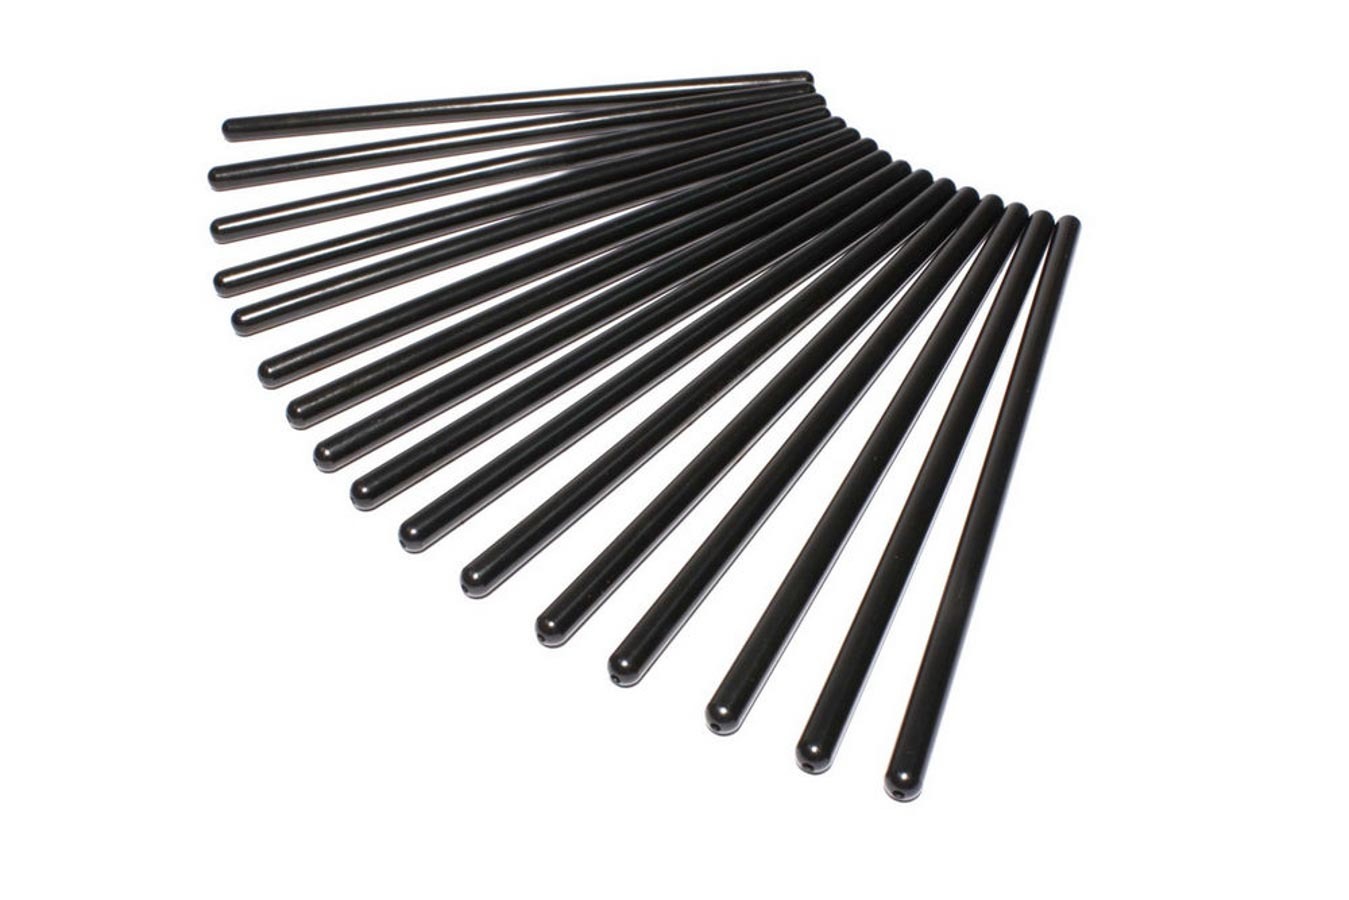 Comp Cams 7262-16 Pushrod, Magnum, 9.130 in Long, 5/16 in Diameter, 0.080 in Thick Wall, Chromoly, Pontiac V8, Set of 16